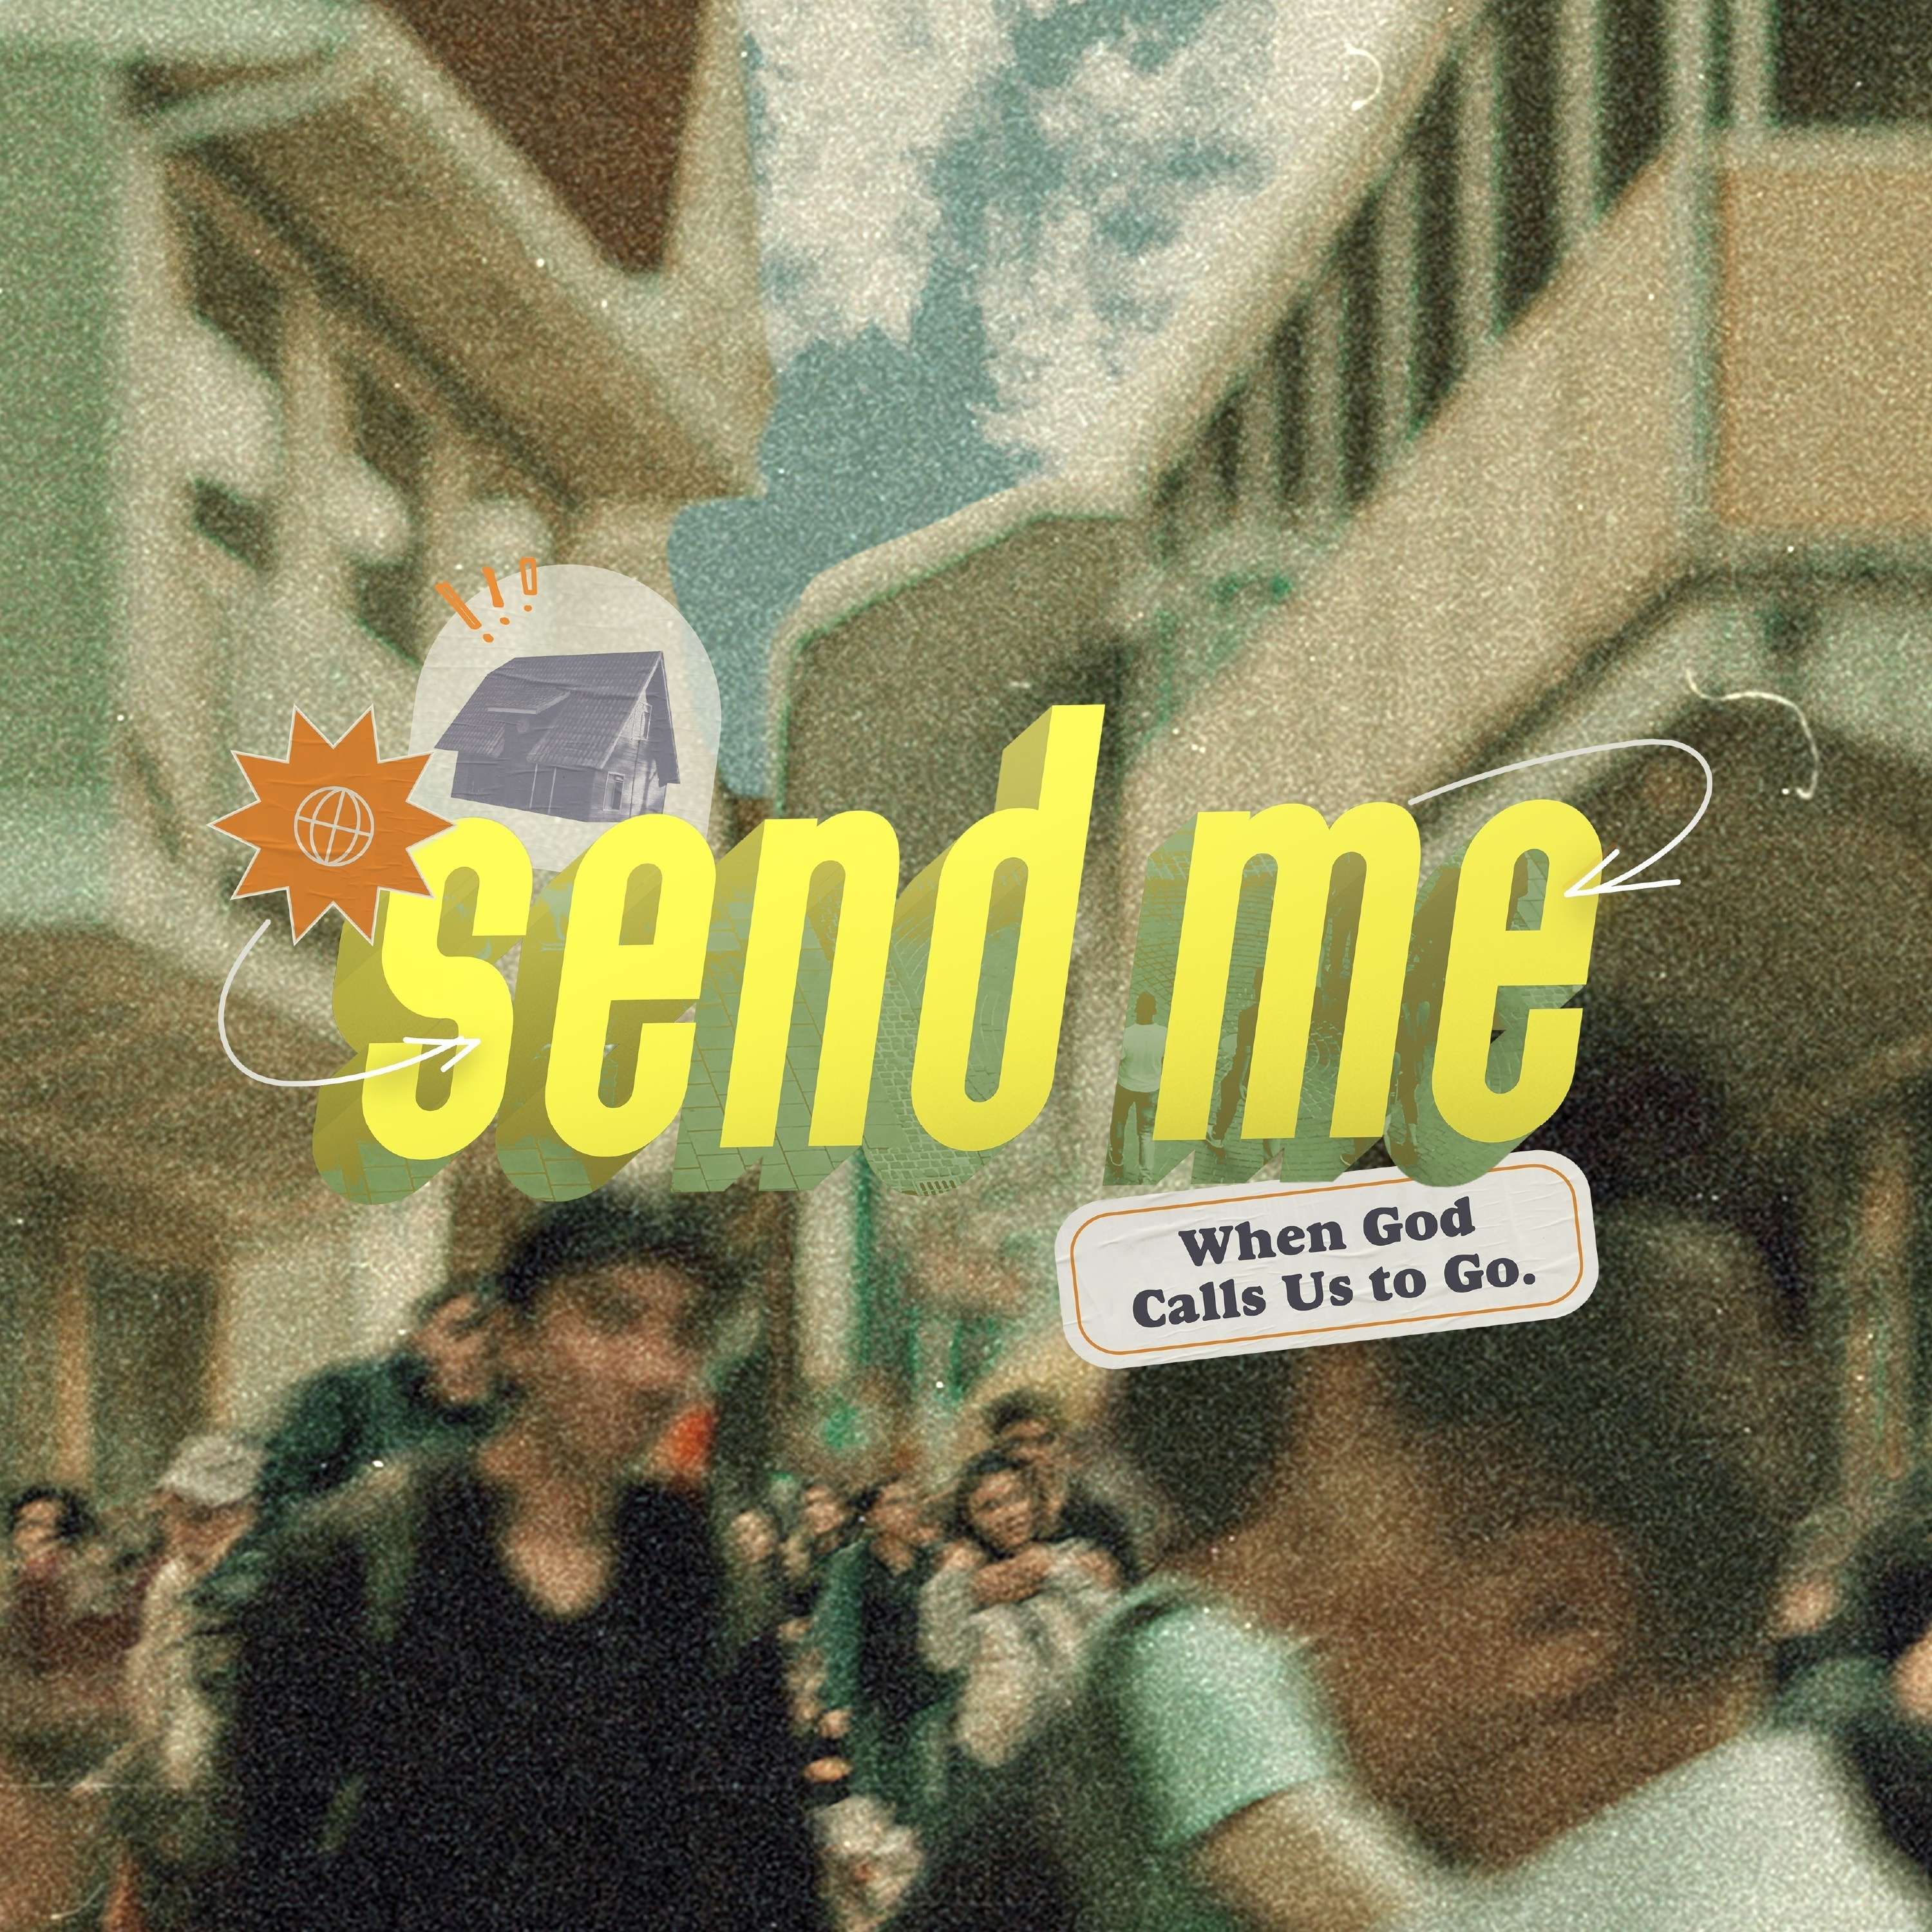 Send Me: Part 3 - You Can't Not Go